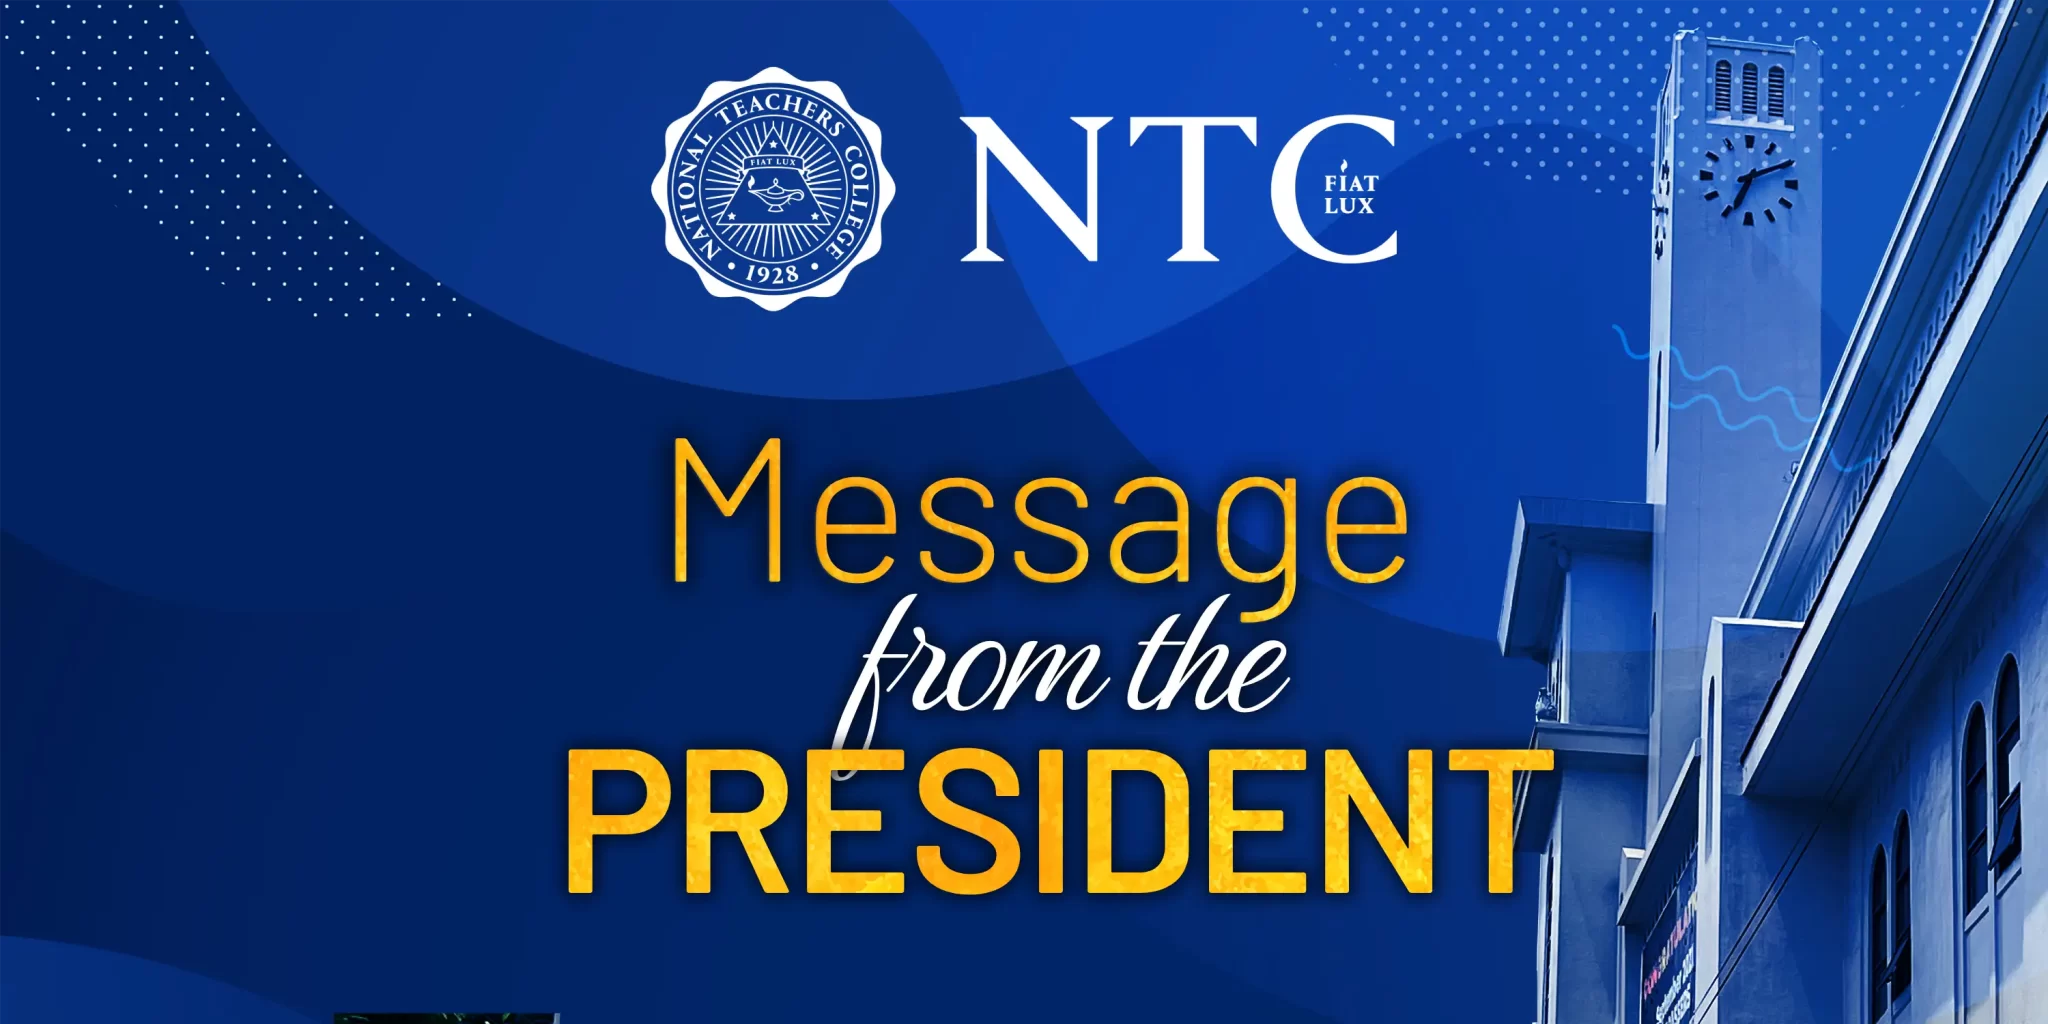 MESSAGE FROM THE PRESIDENT2 2048x1024 1